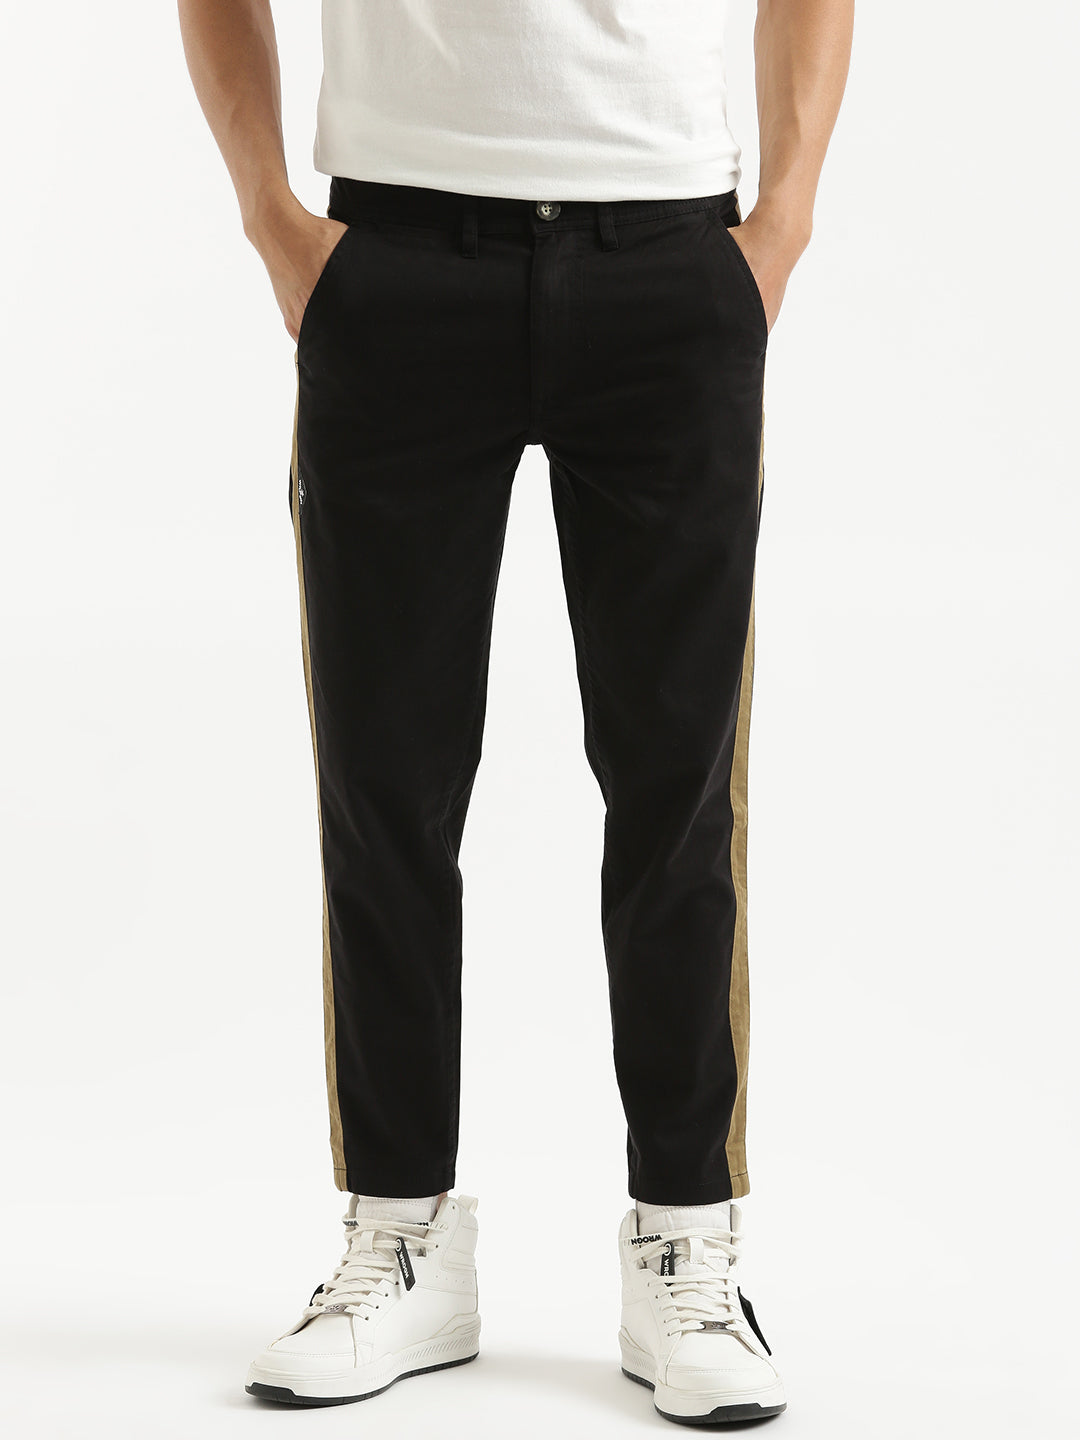 Stripe Accented Black Jeans